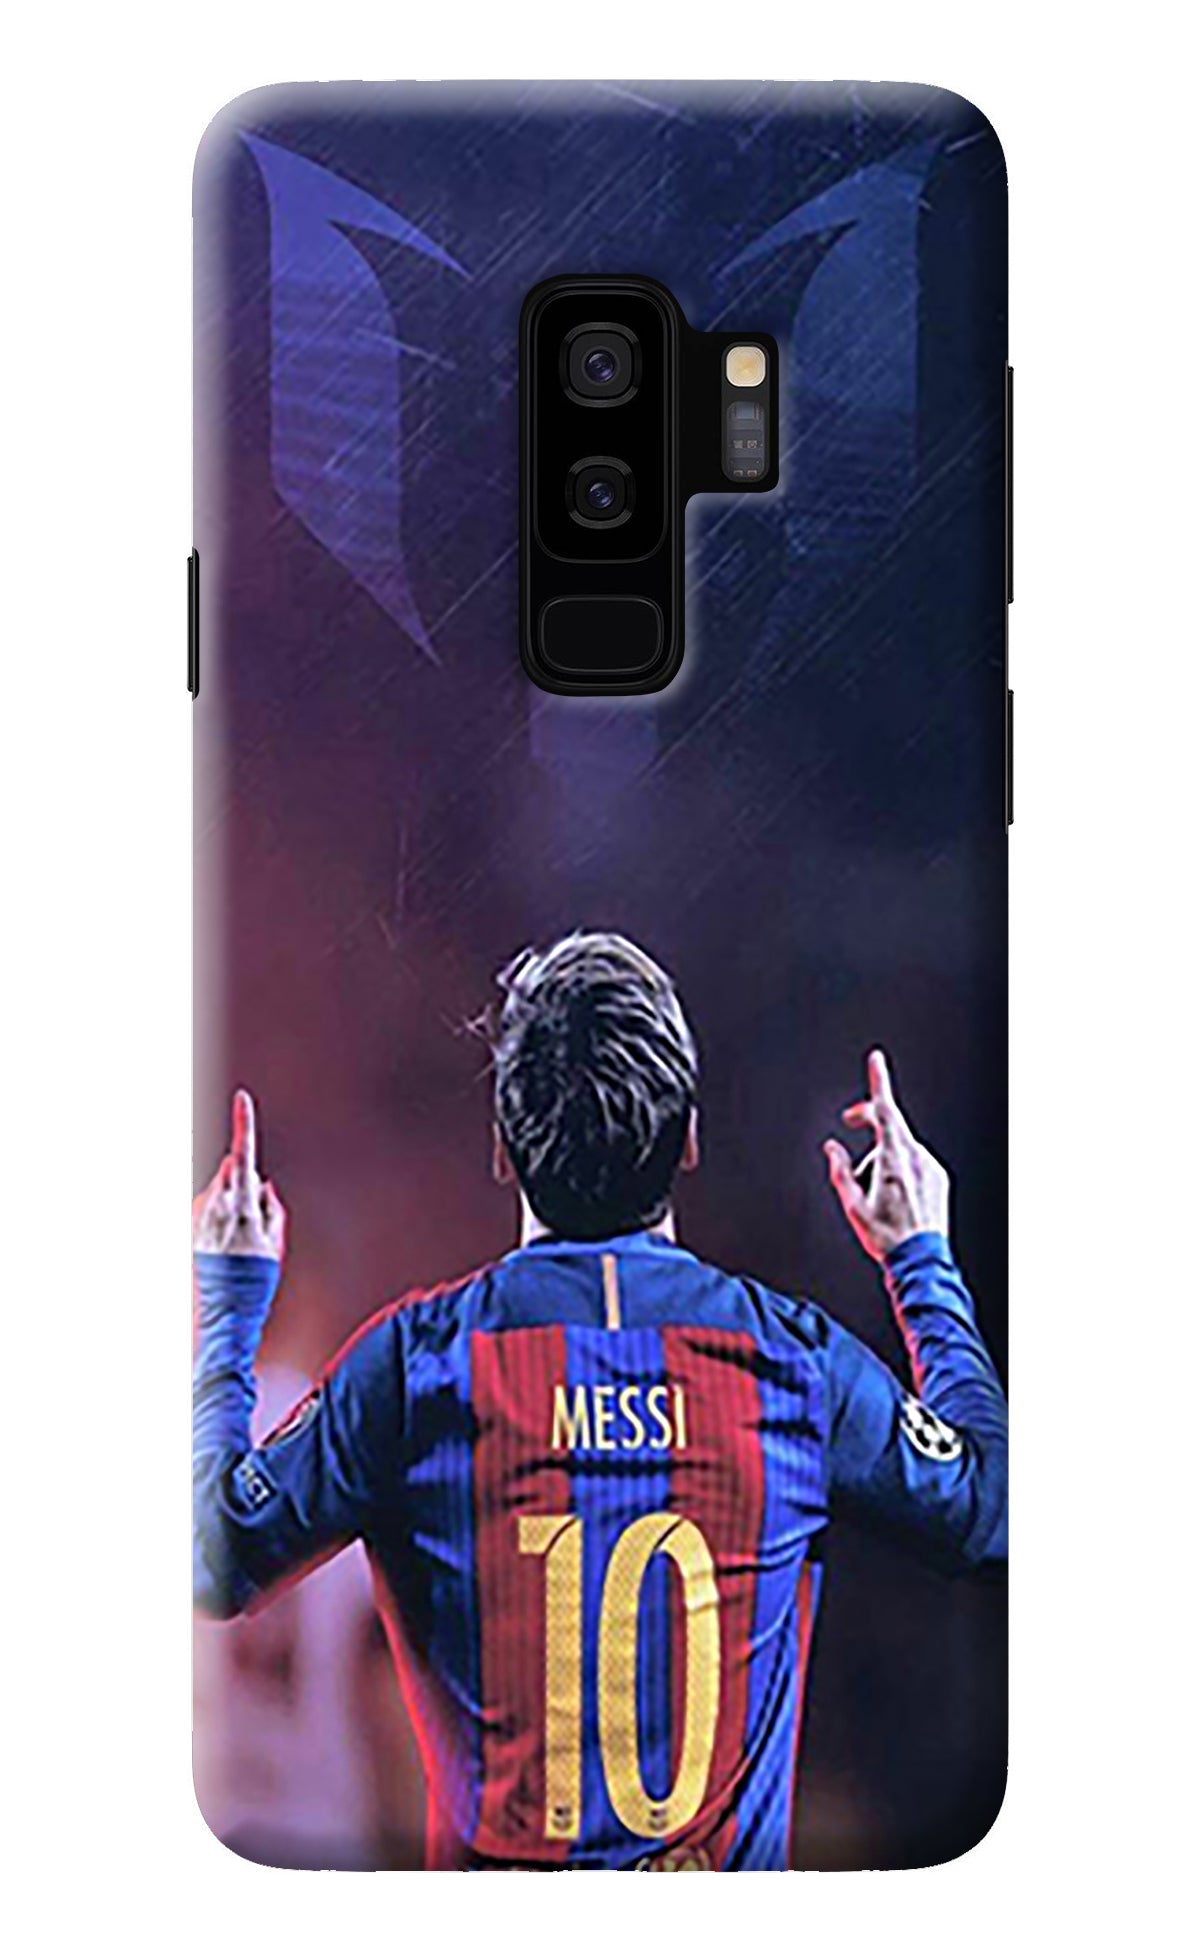 Messi Samsung S9 Plus Back Cover